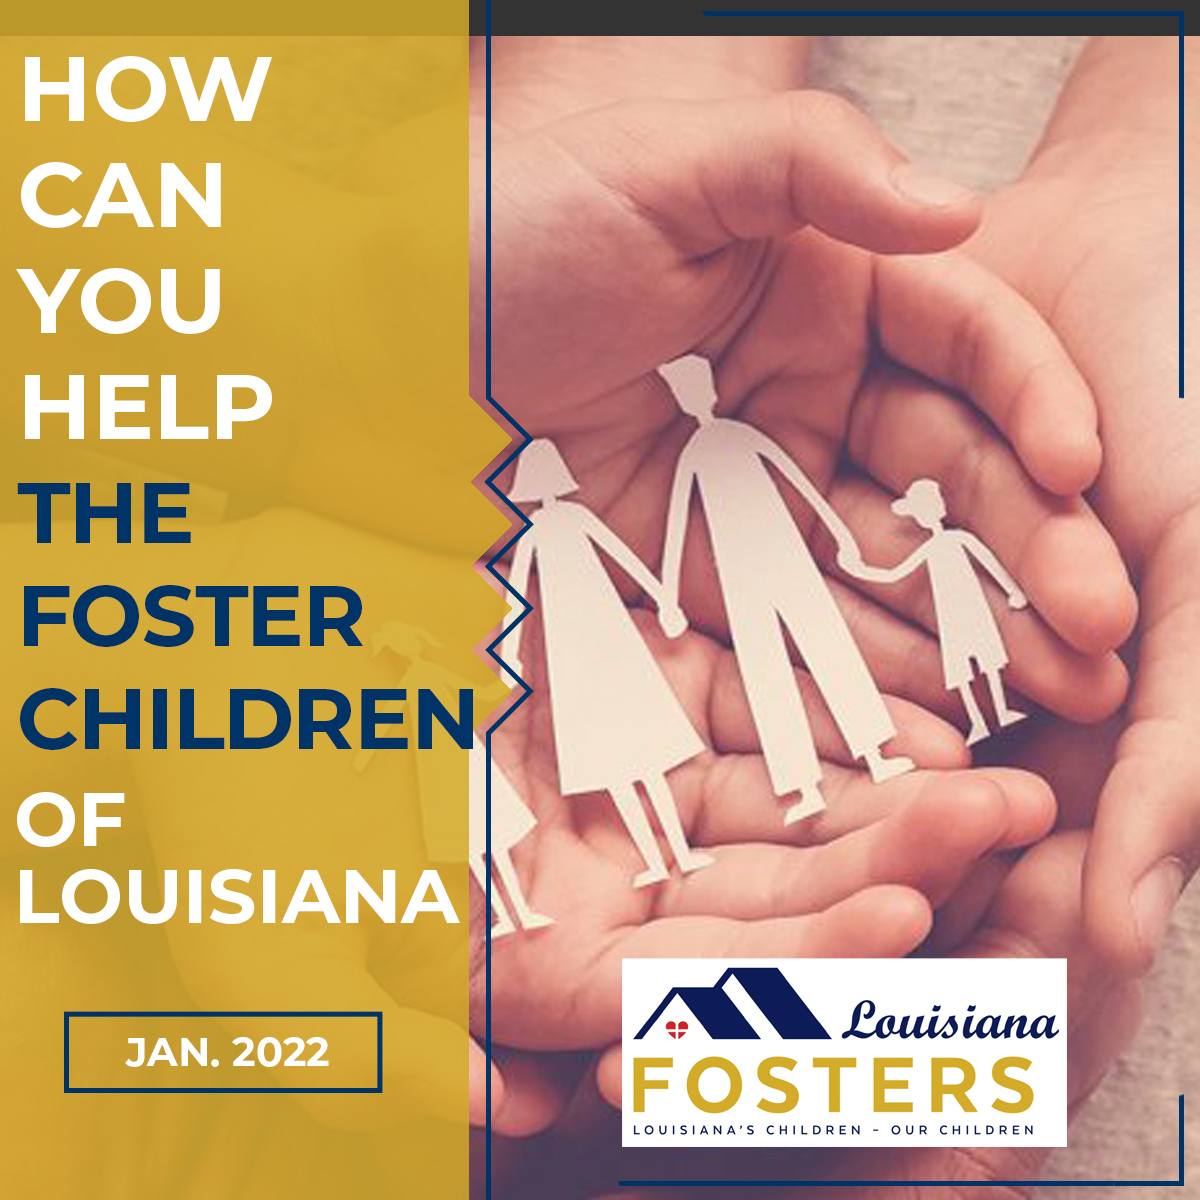 Louisiana Fosters – How Can You Help The Foster Children of Louisiana?